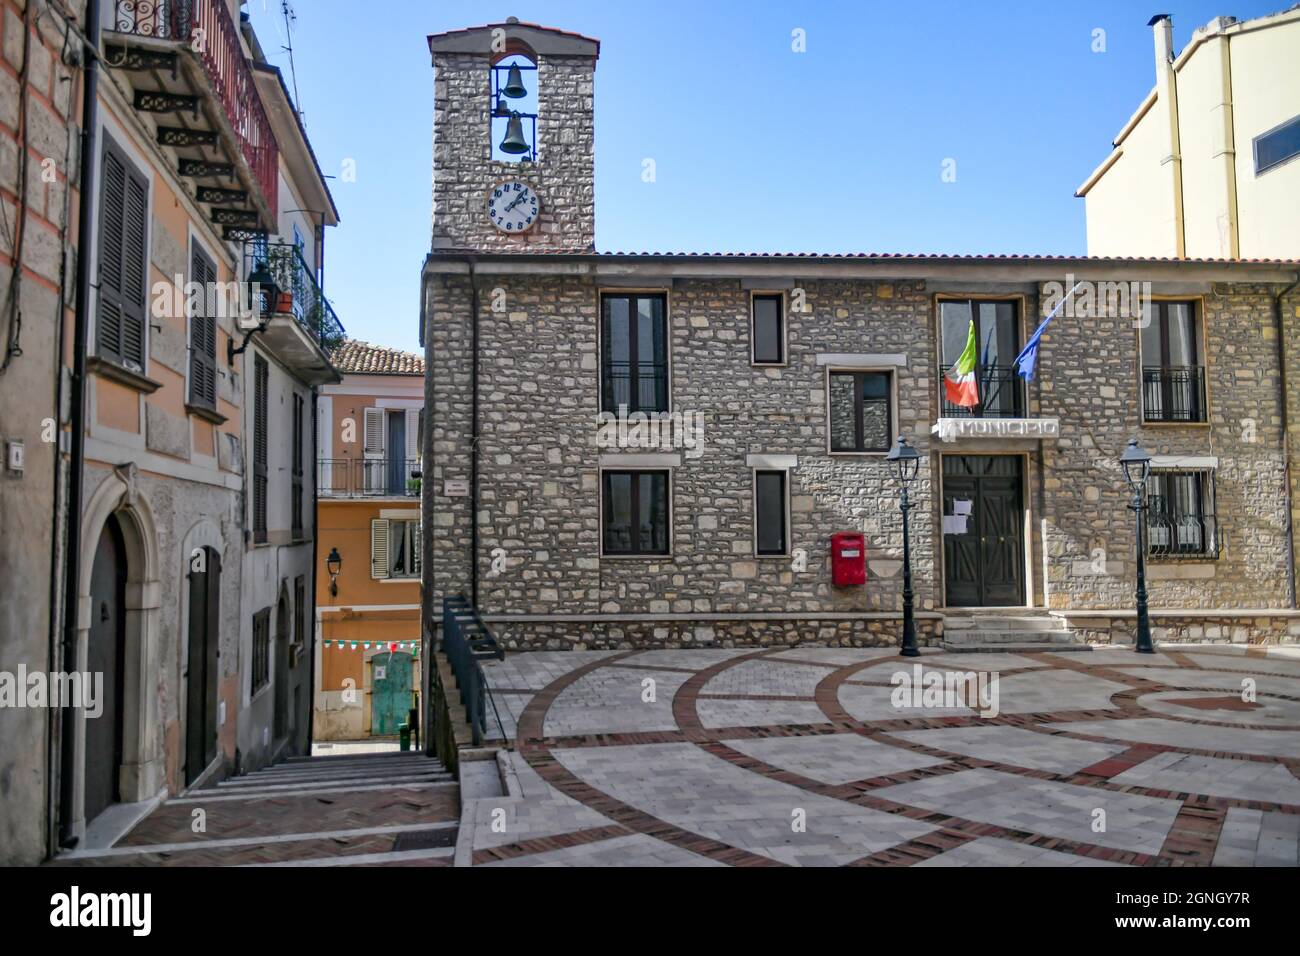 A square with a of Monteroduni, a medieval town of Molise region, Italy. Stock Photo